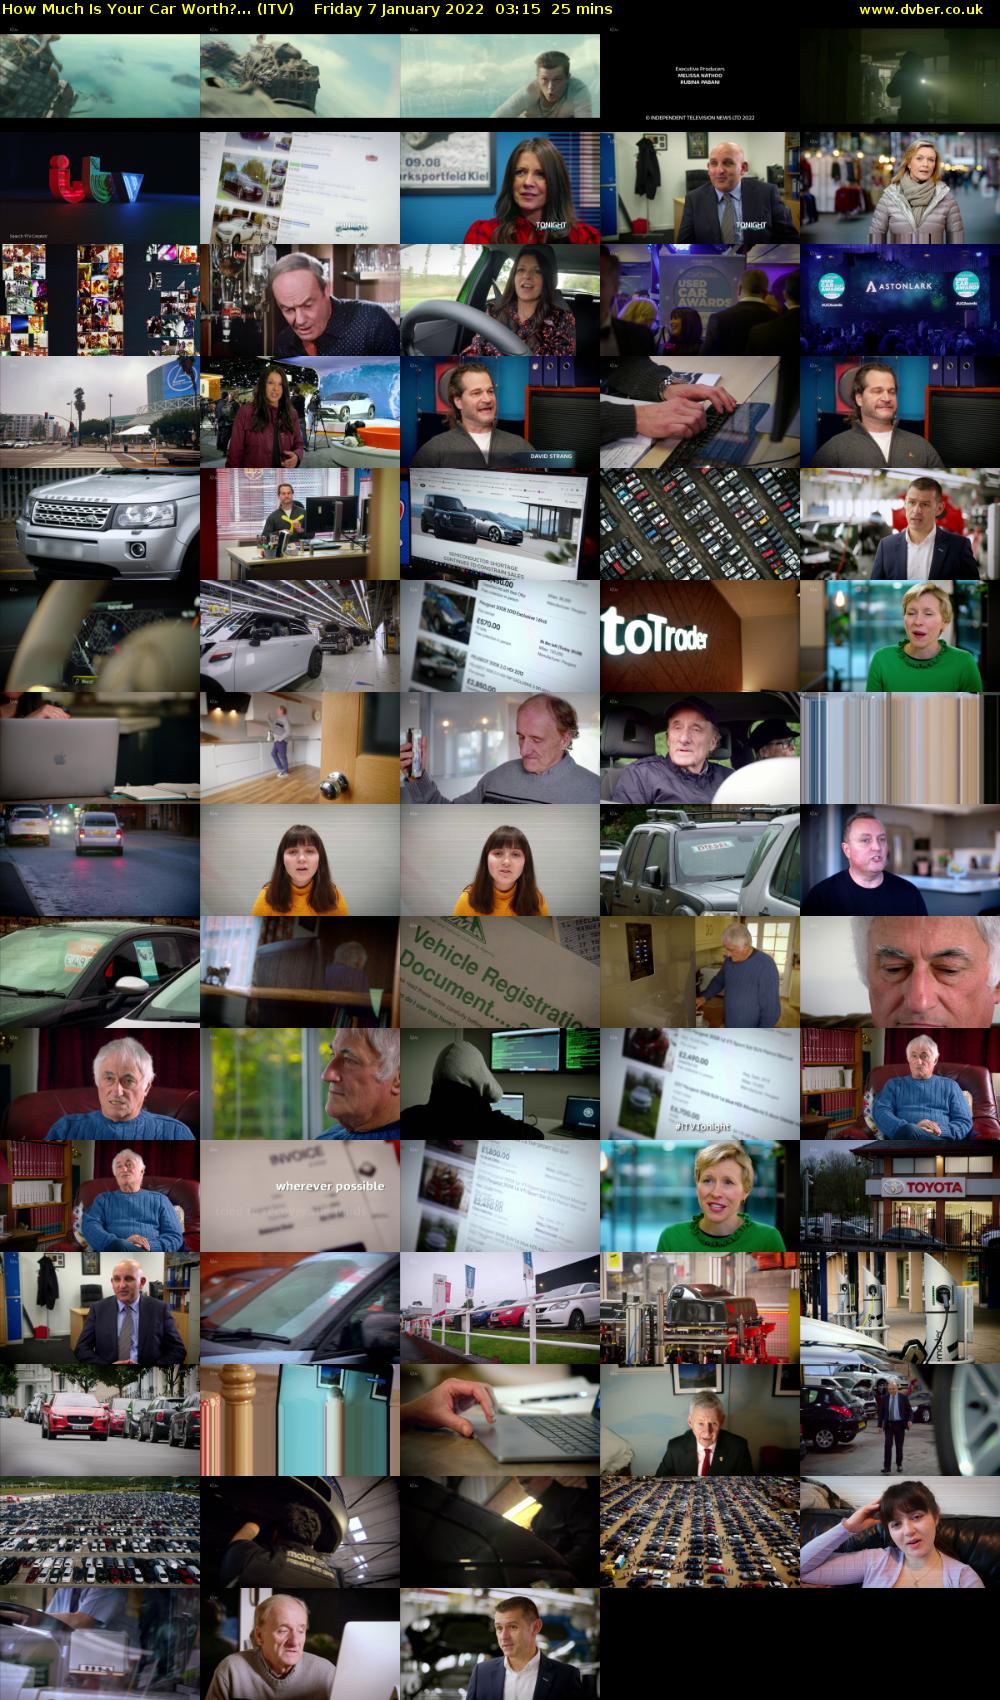 How Much Is Your Car Worth?... (ITV) Friday 7 January 2022 03:15 - 03:40